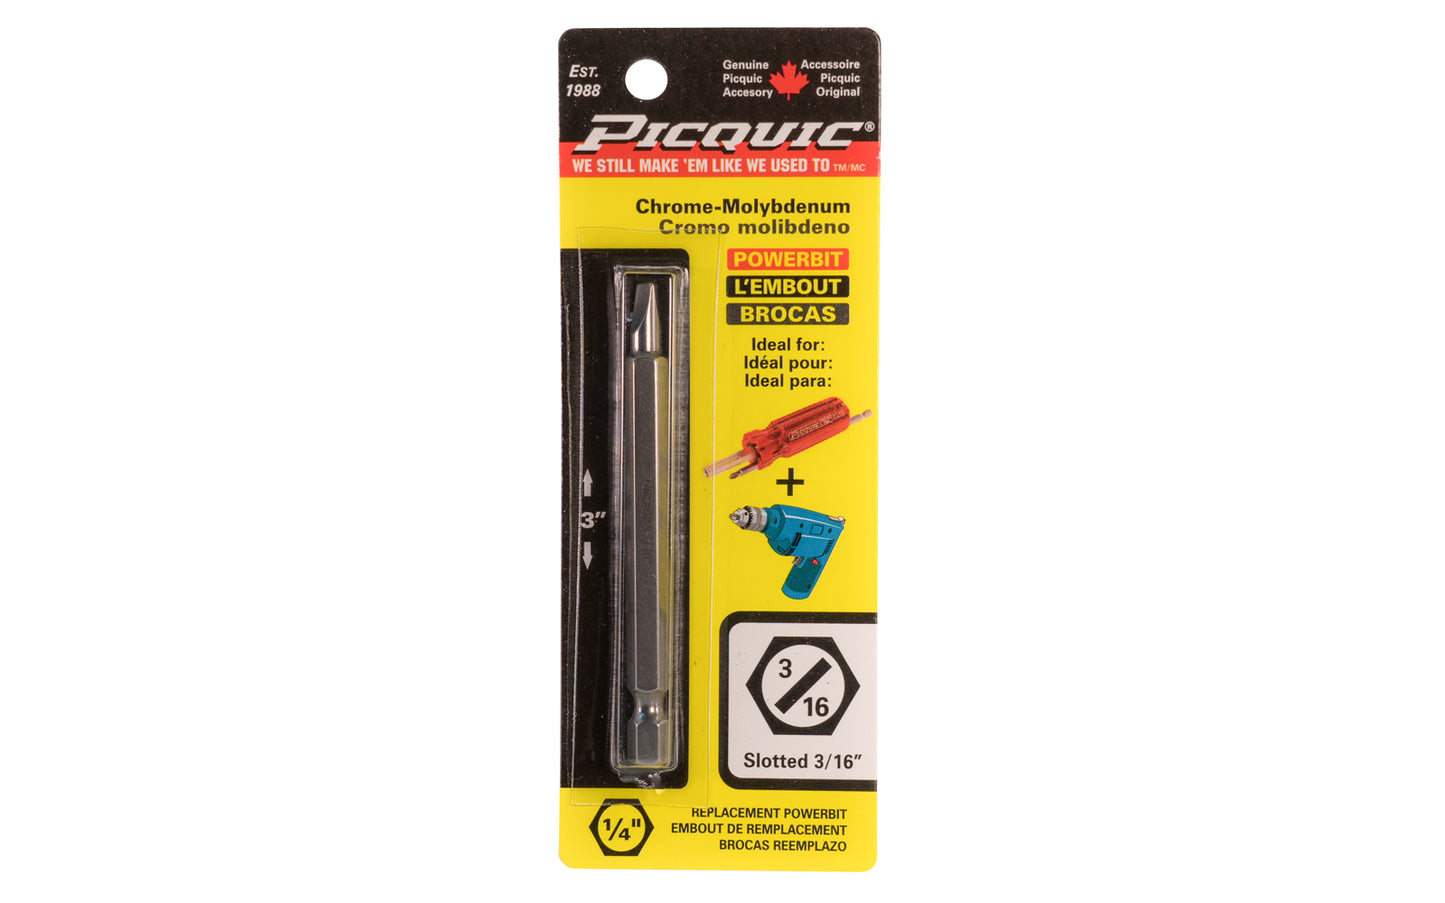  Picquic 3" length powerbit - 3/16" Slot Bit. 1/4" hex shank power bits ideal for use in drills & impact drivers. Model 88131.